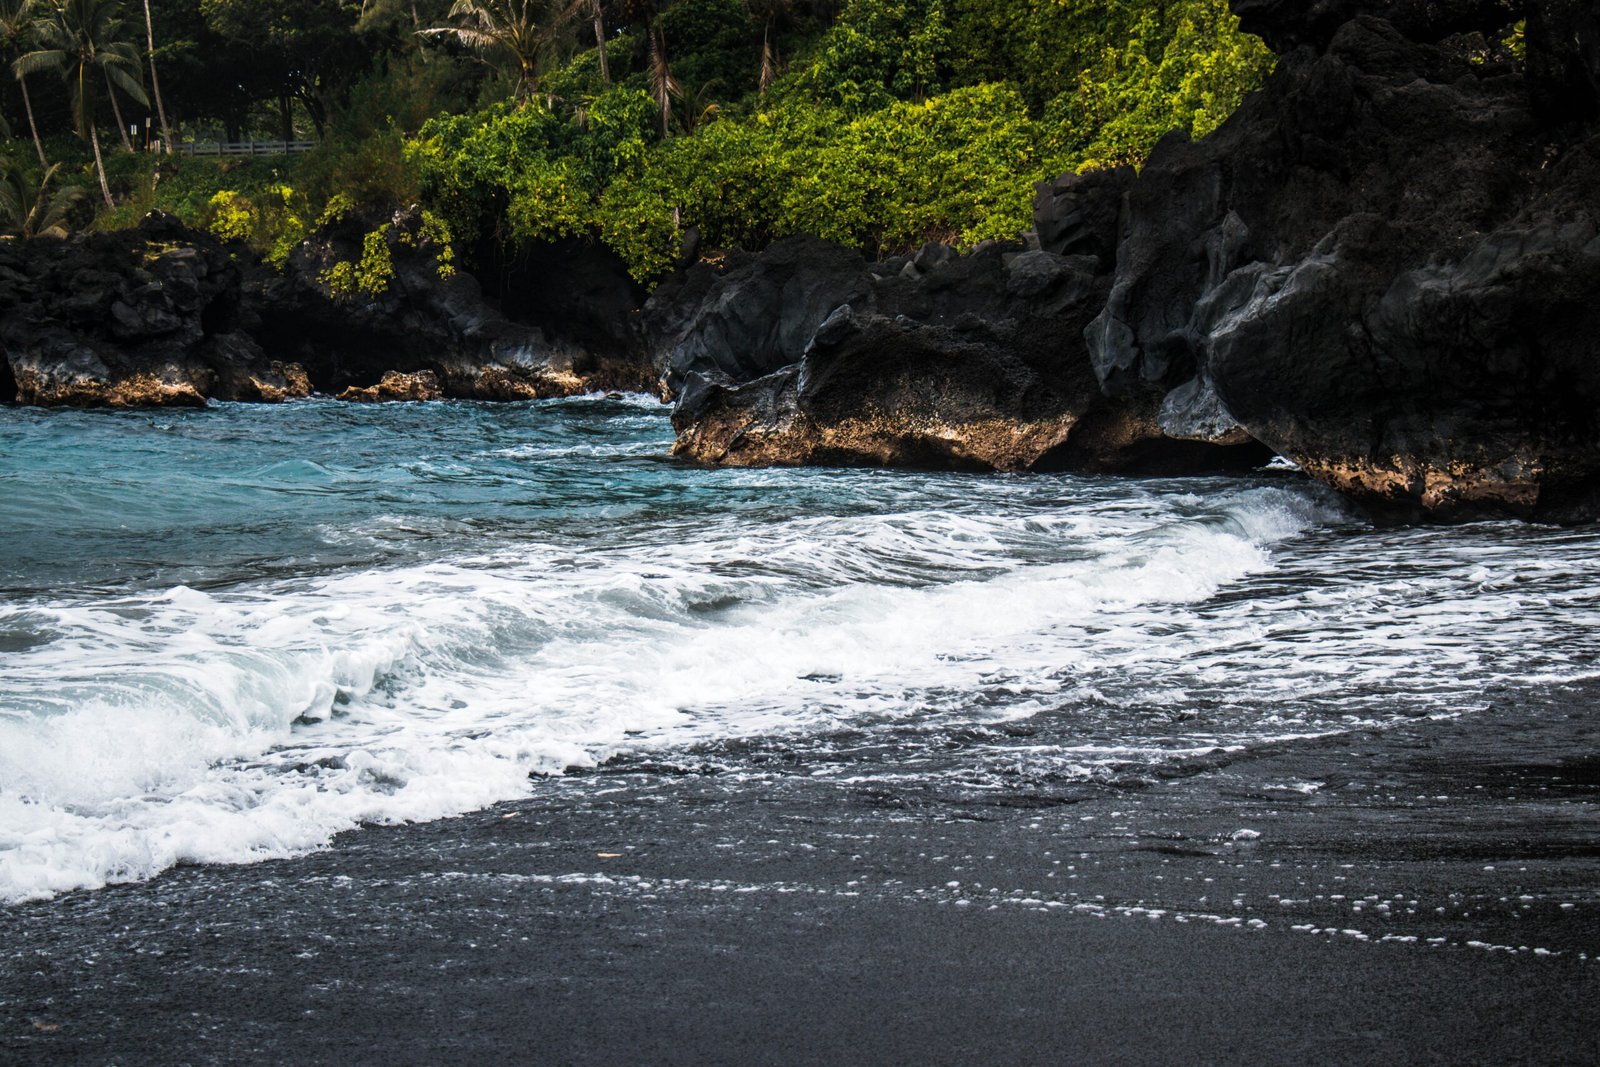 the black sand beaches in hawaii are comprised of ________.